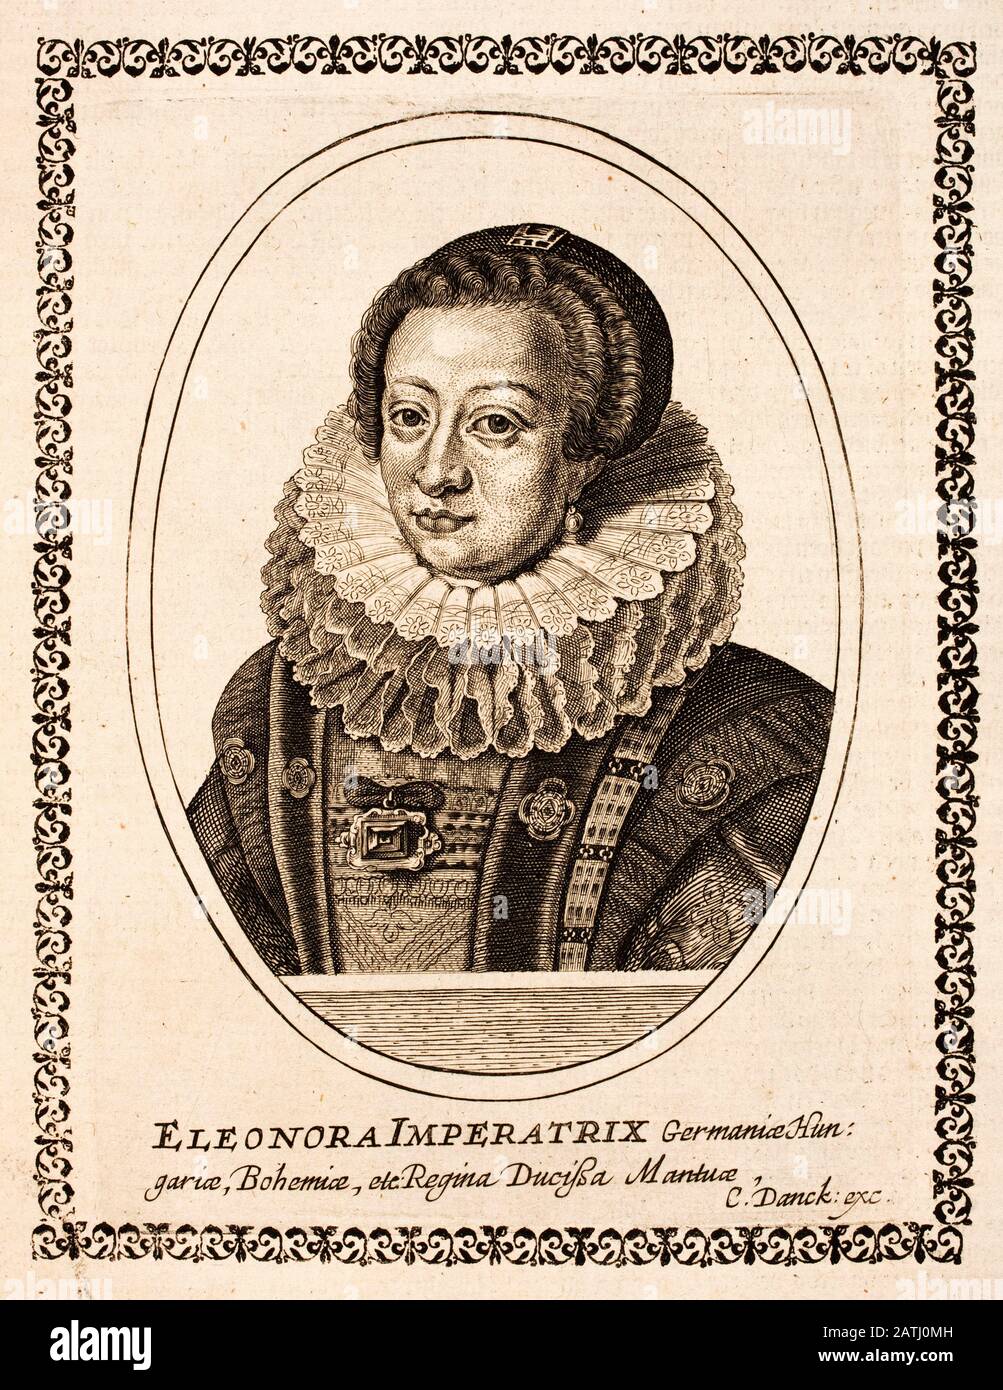 Portrait of Eleonora Gonzaga (1598 – 1655),  born Princess of Mantua as a member of the House of Gonzaga and by marriage Holy Roman Empress, German Qu Stock Photo